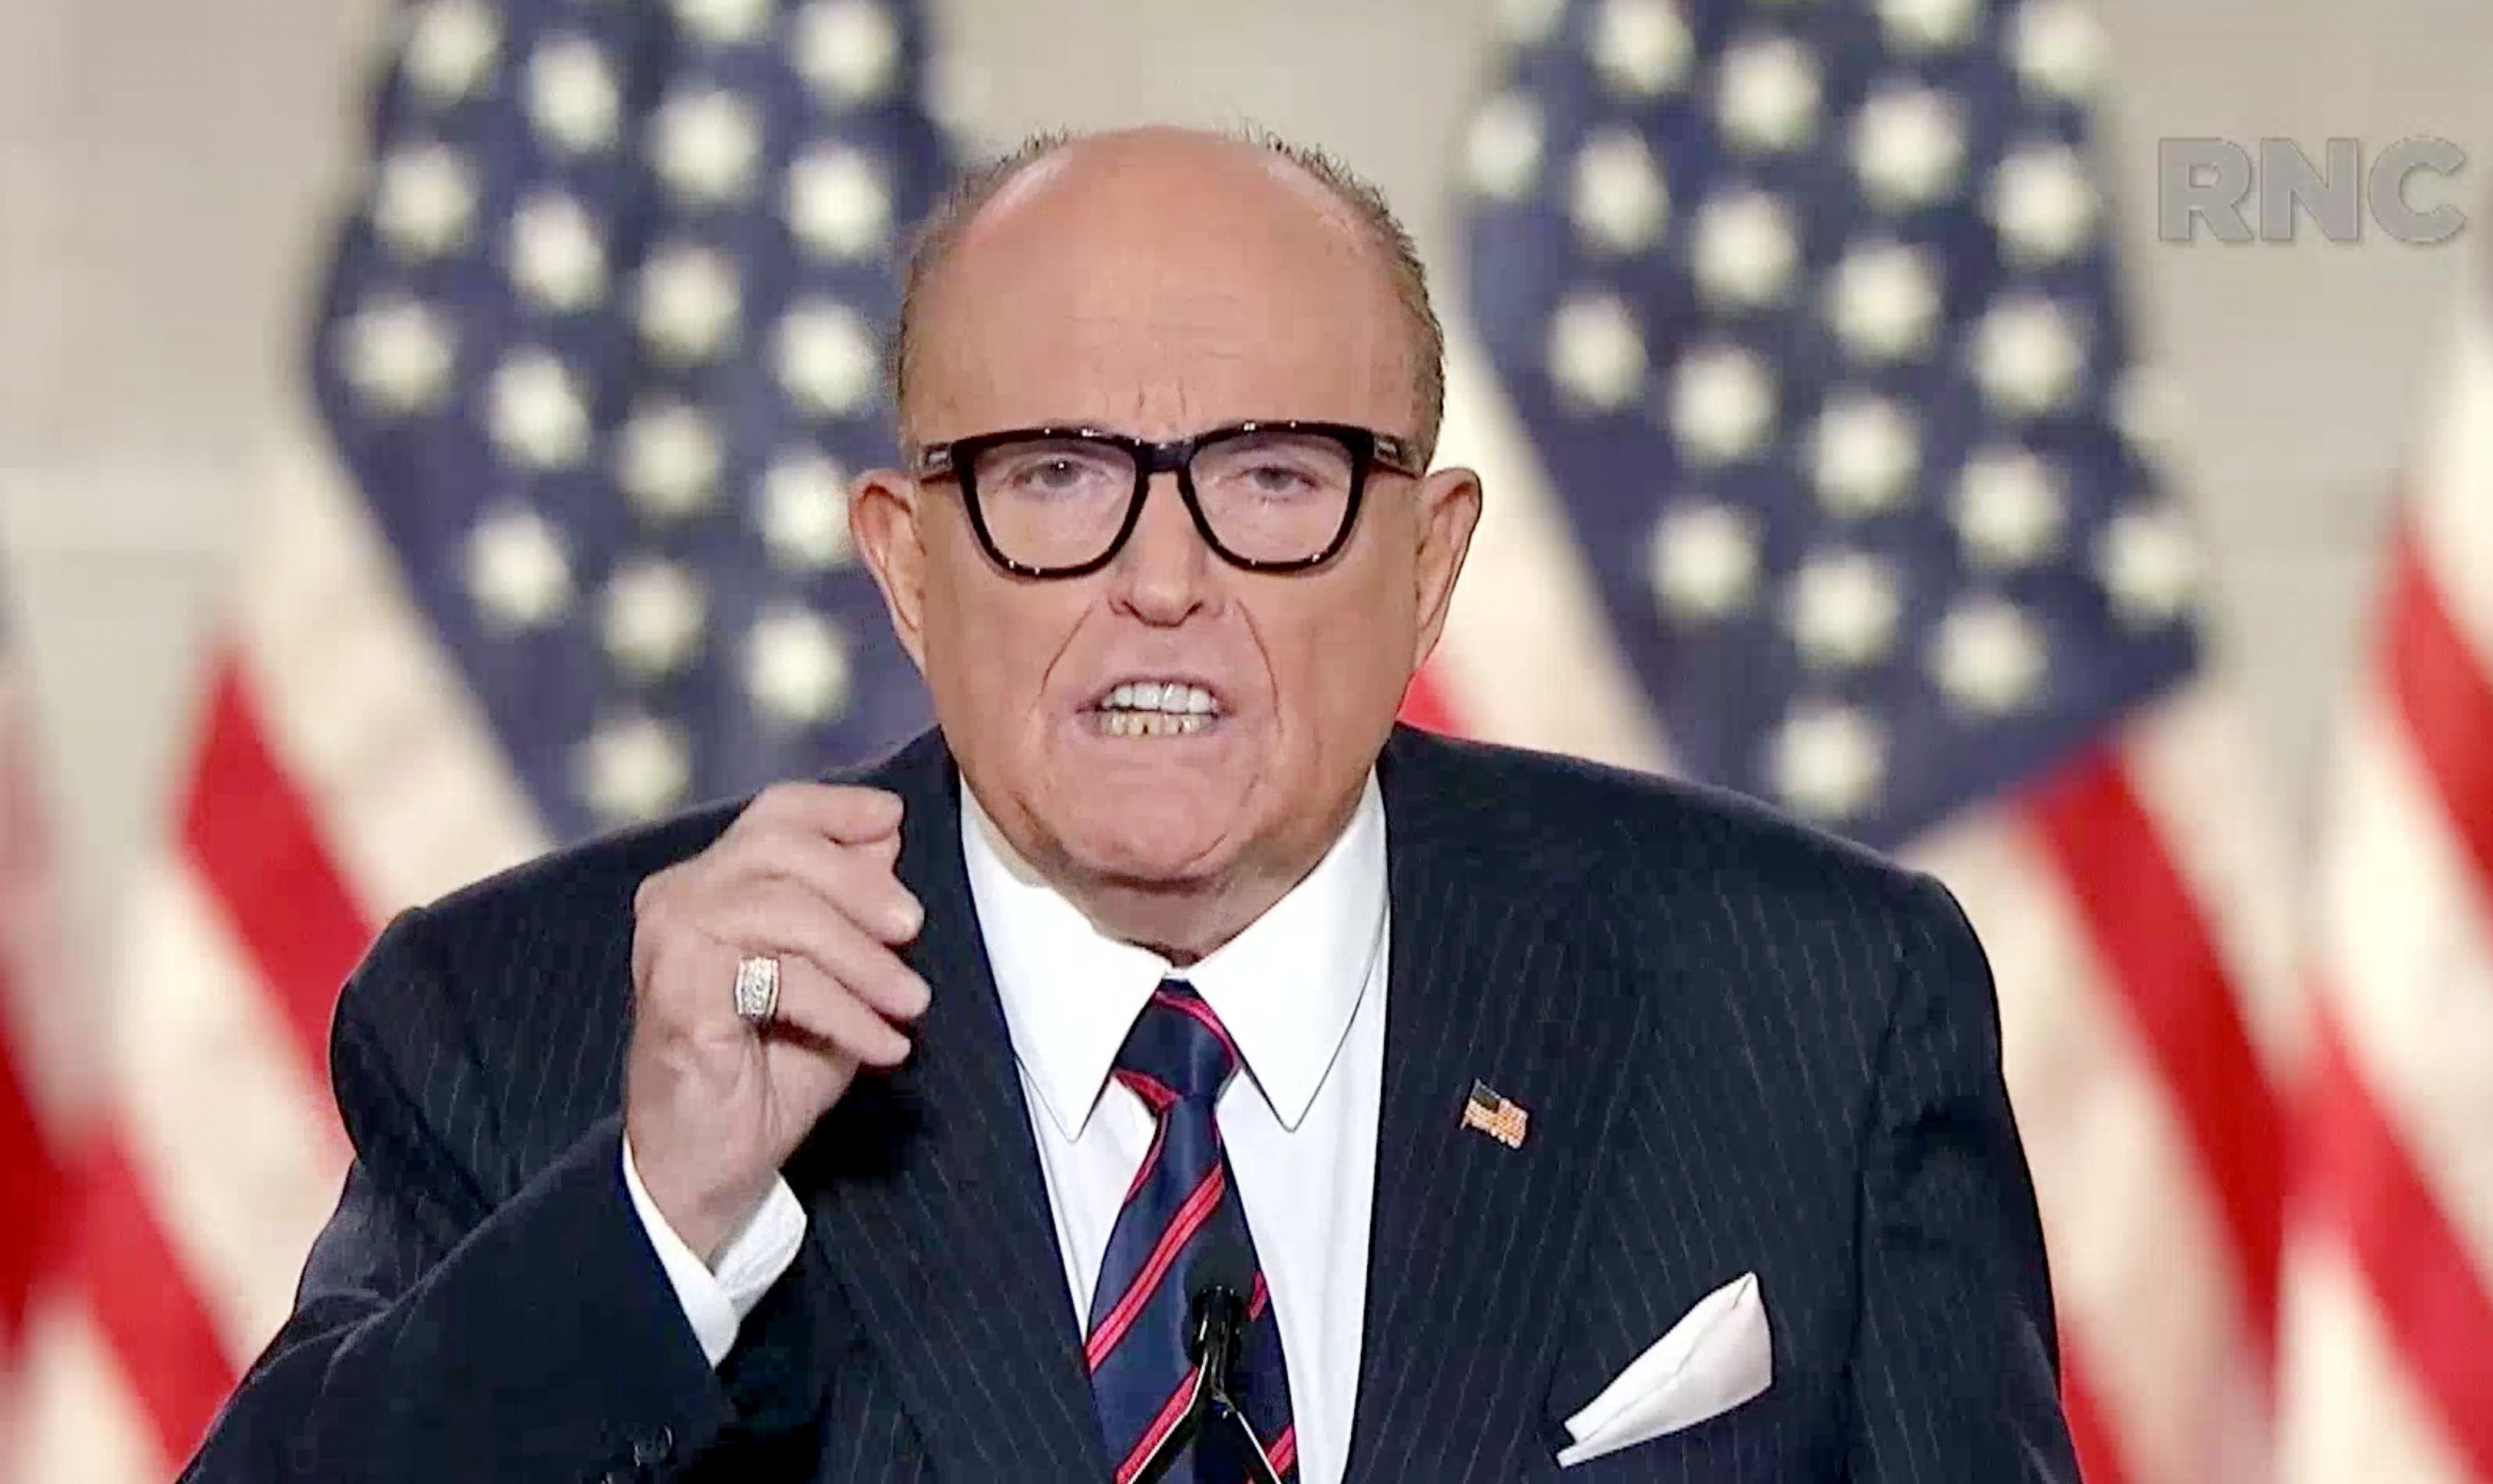 Rudy Giuliani in front of American flags.